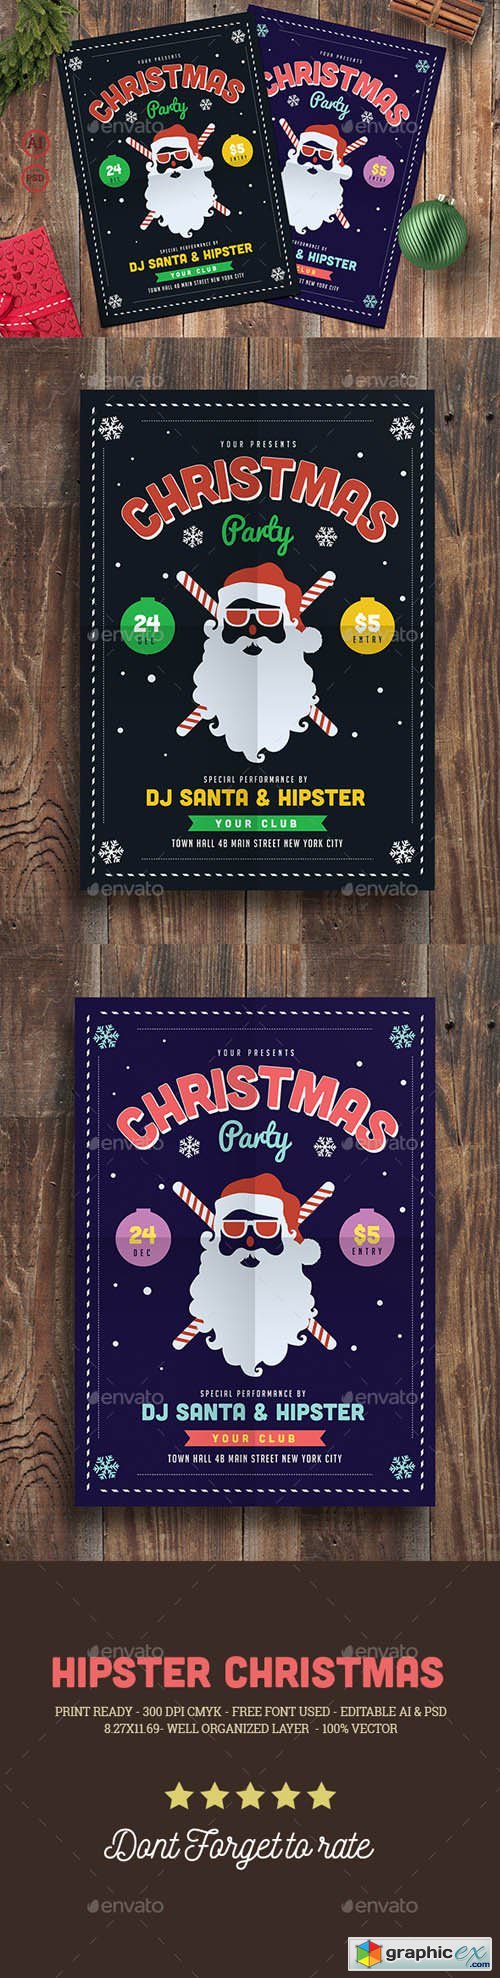 Hipster Christmas Party Flyer